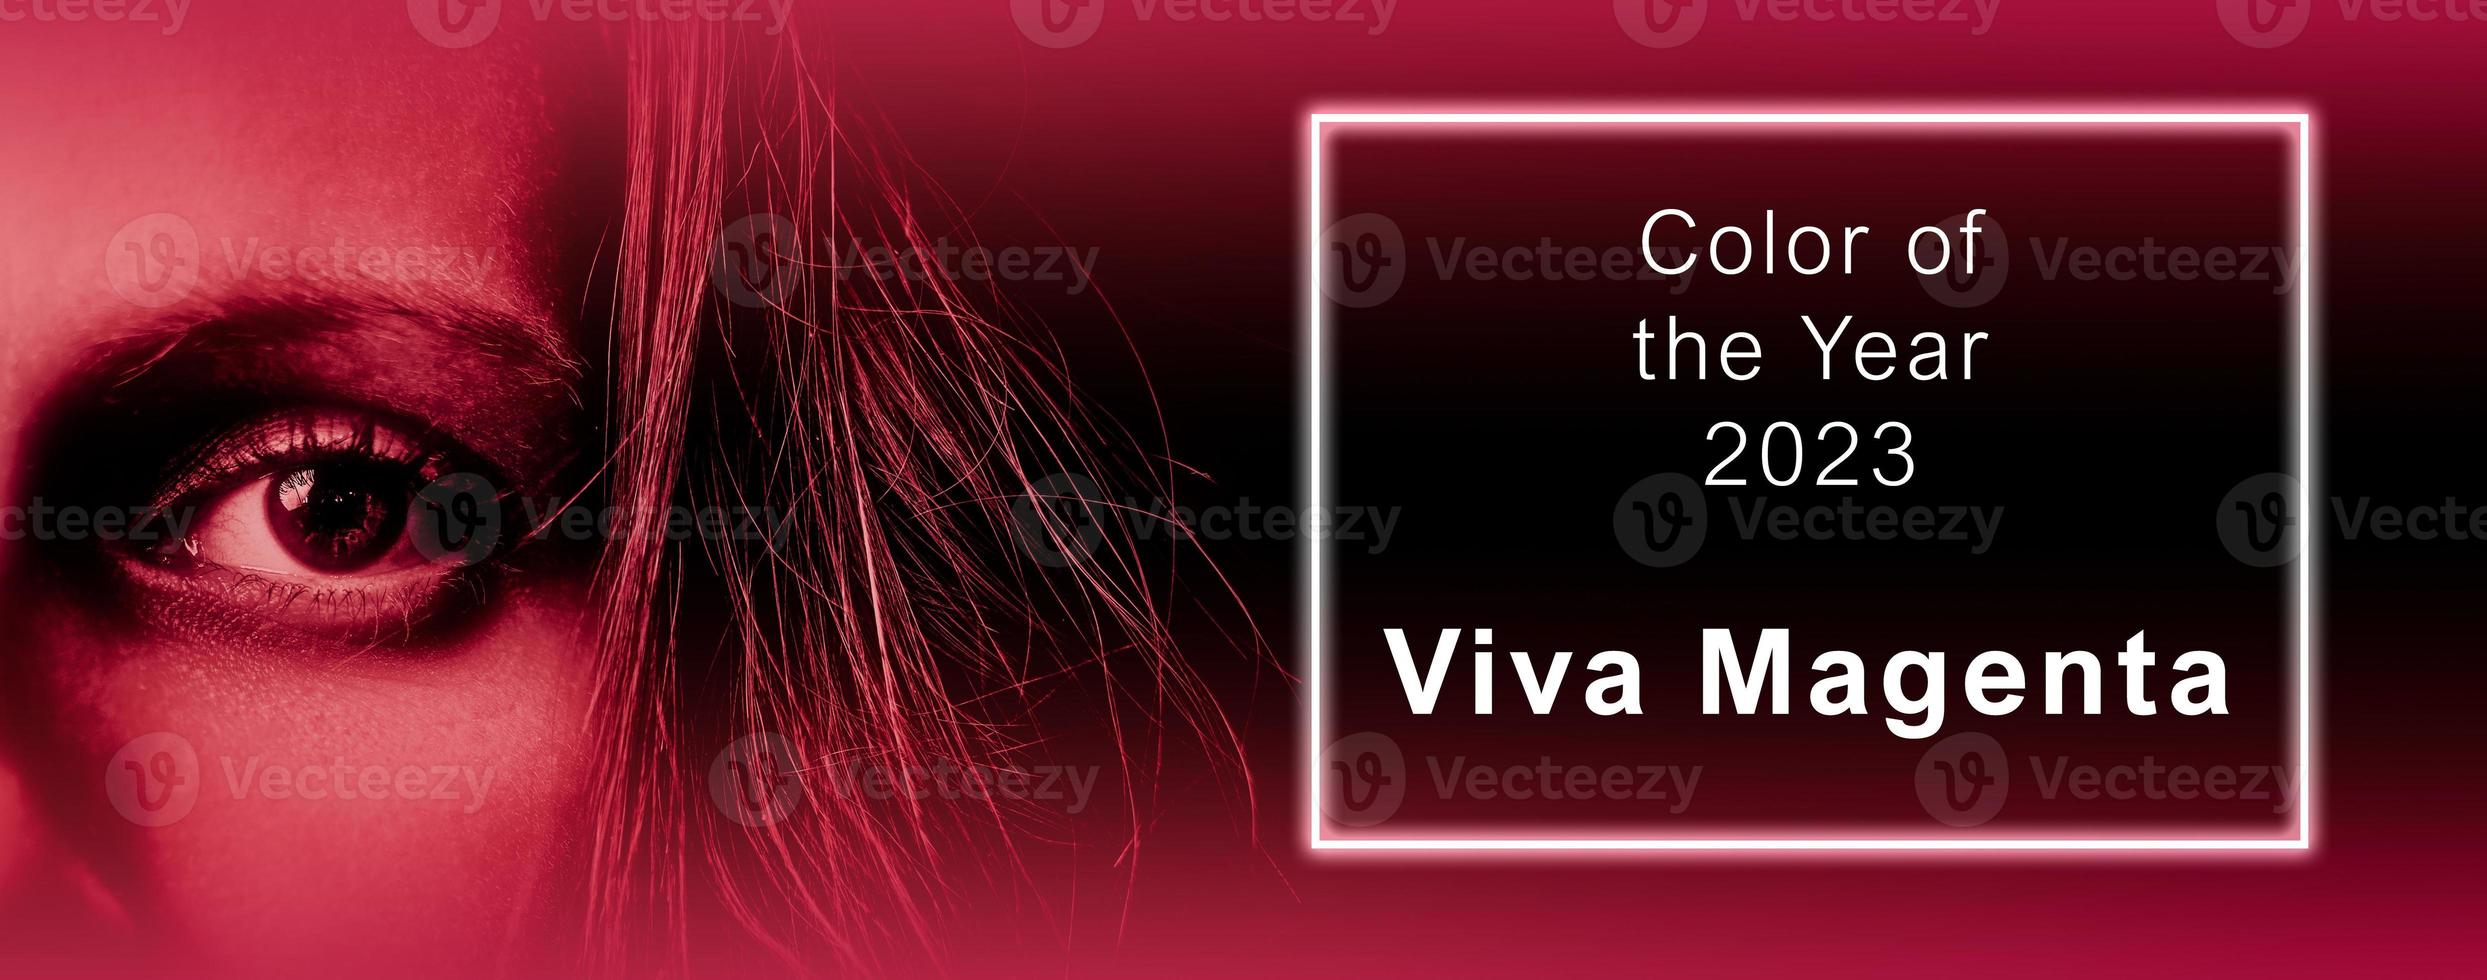 Viva Magenta - color of the year 2023. Trendy color sample. Toned picture with text. Beutiful banner with woman's eye. Fashion, style. photo